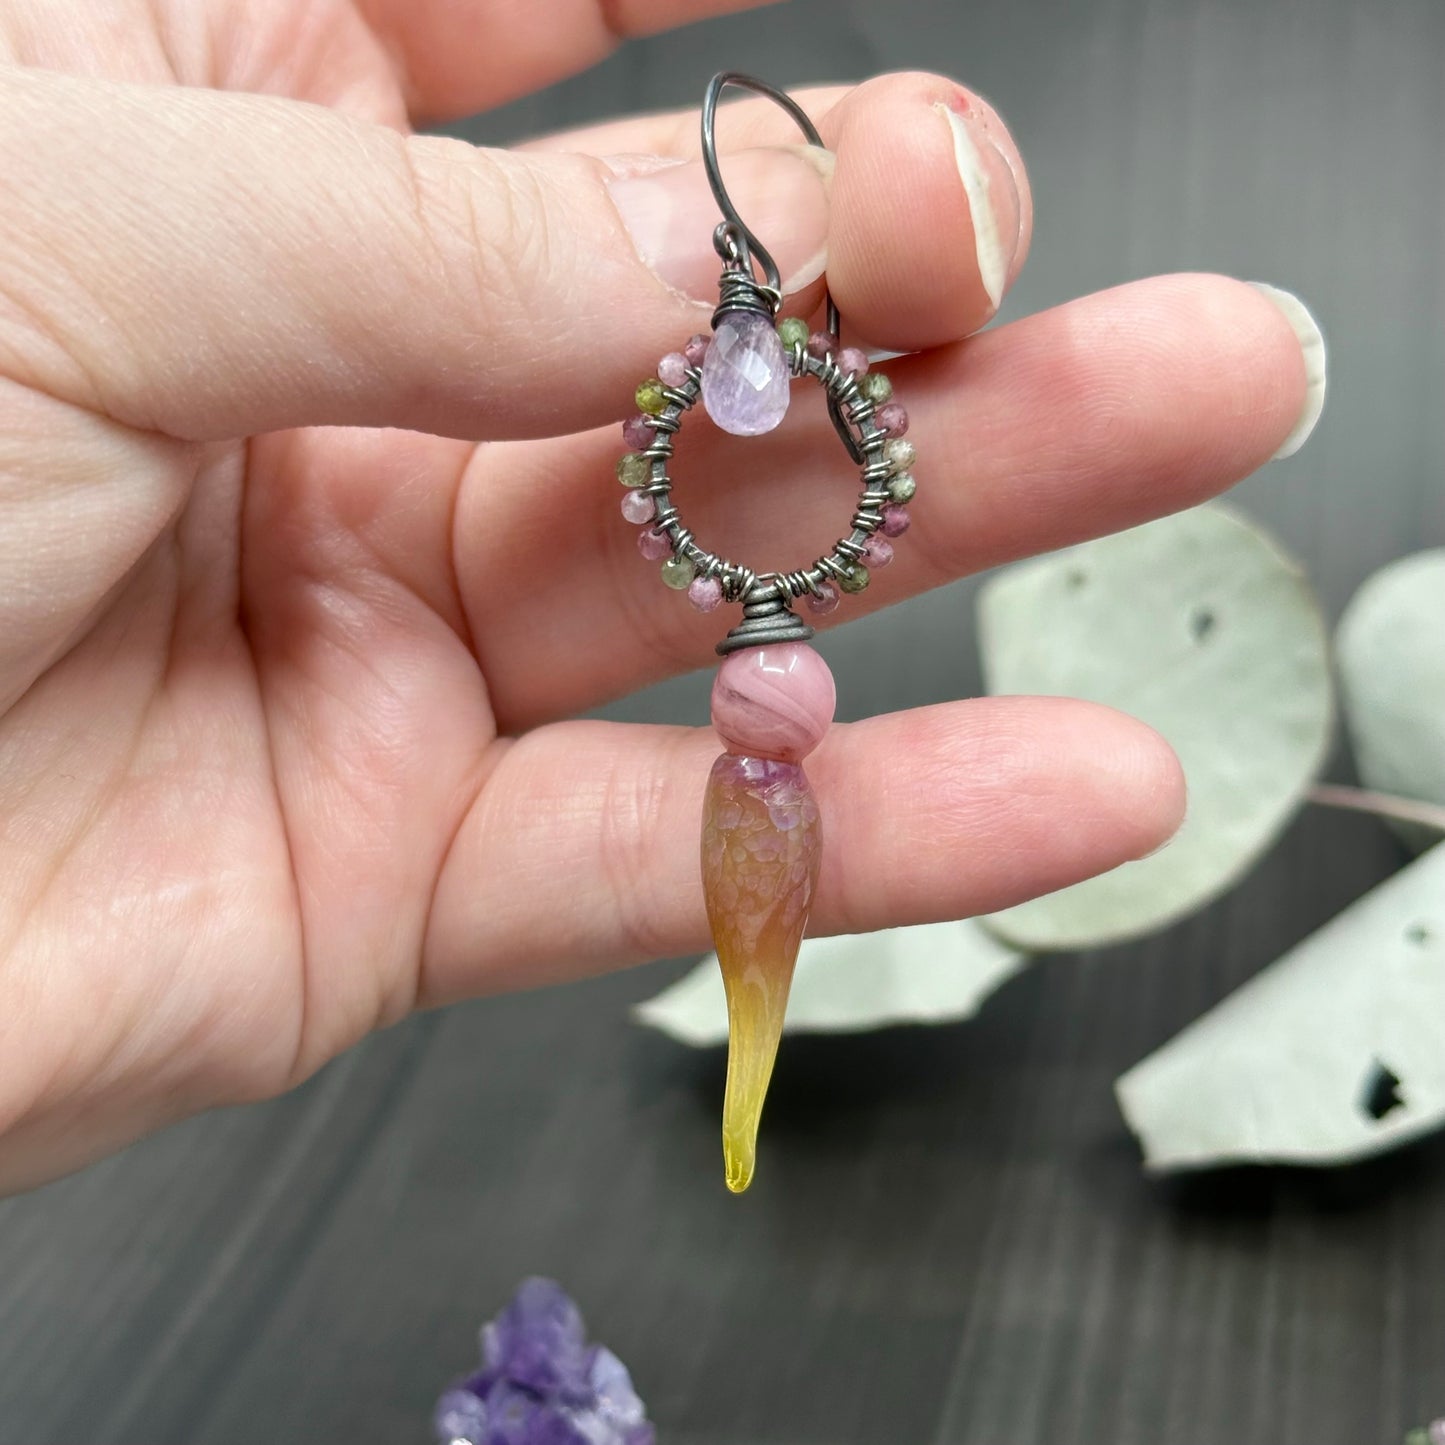 Sunrise Sterling Silver Earrings with Amethyst and Tourmaline